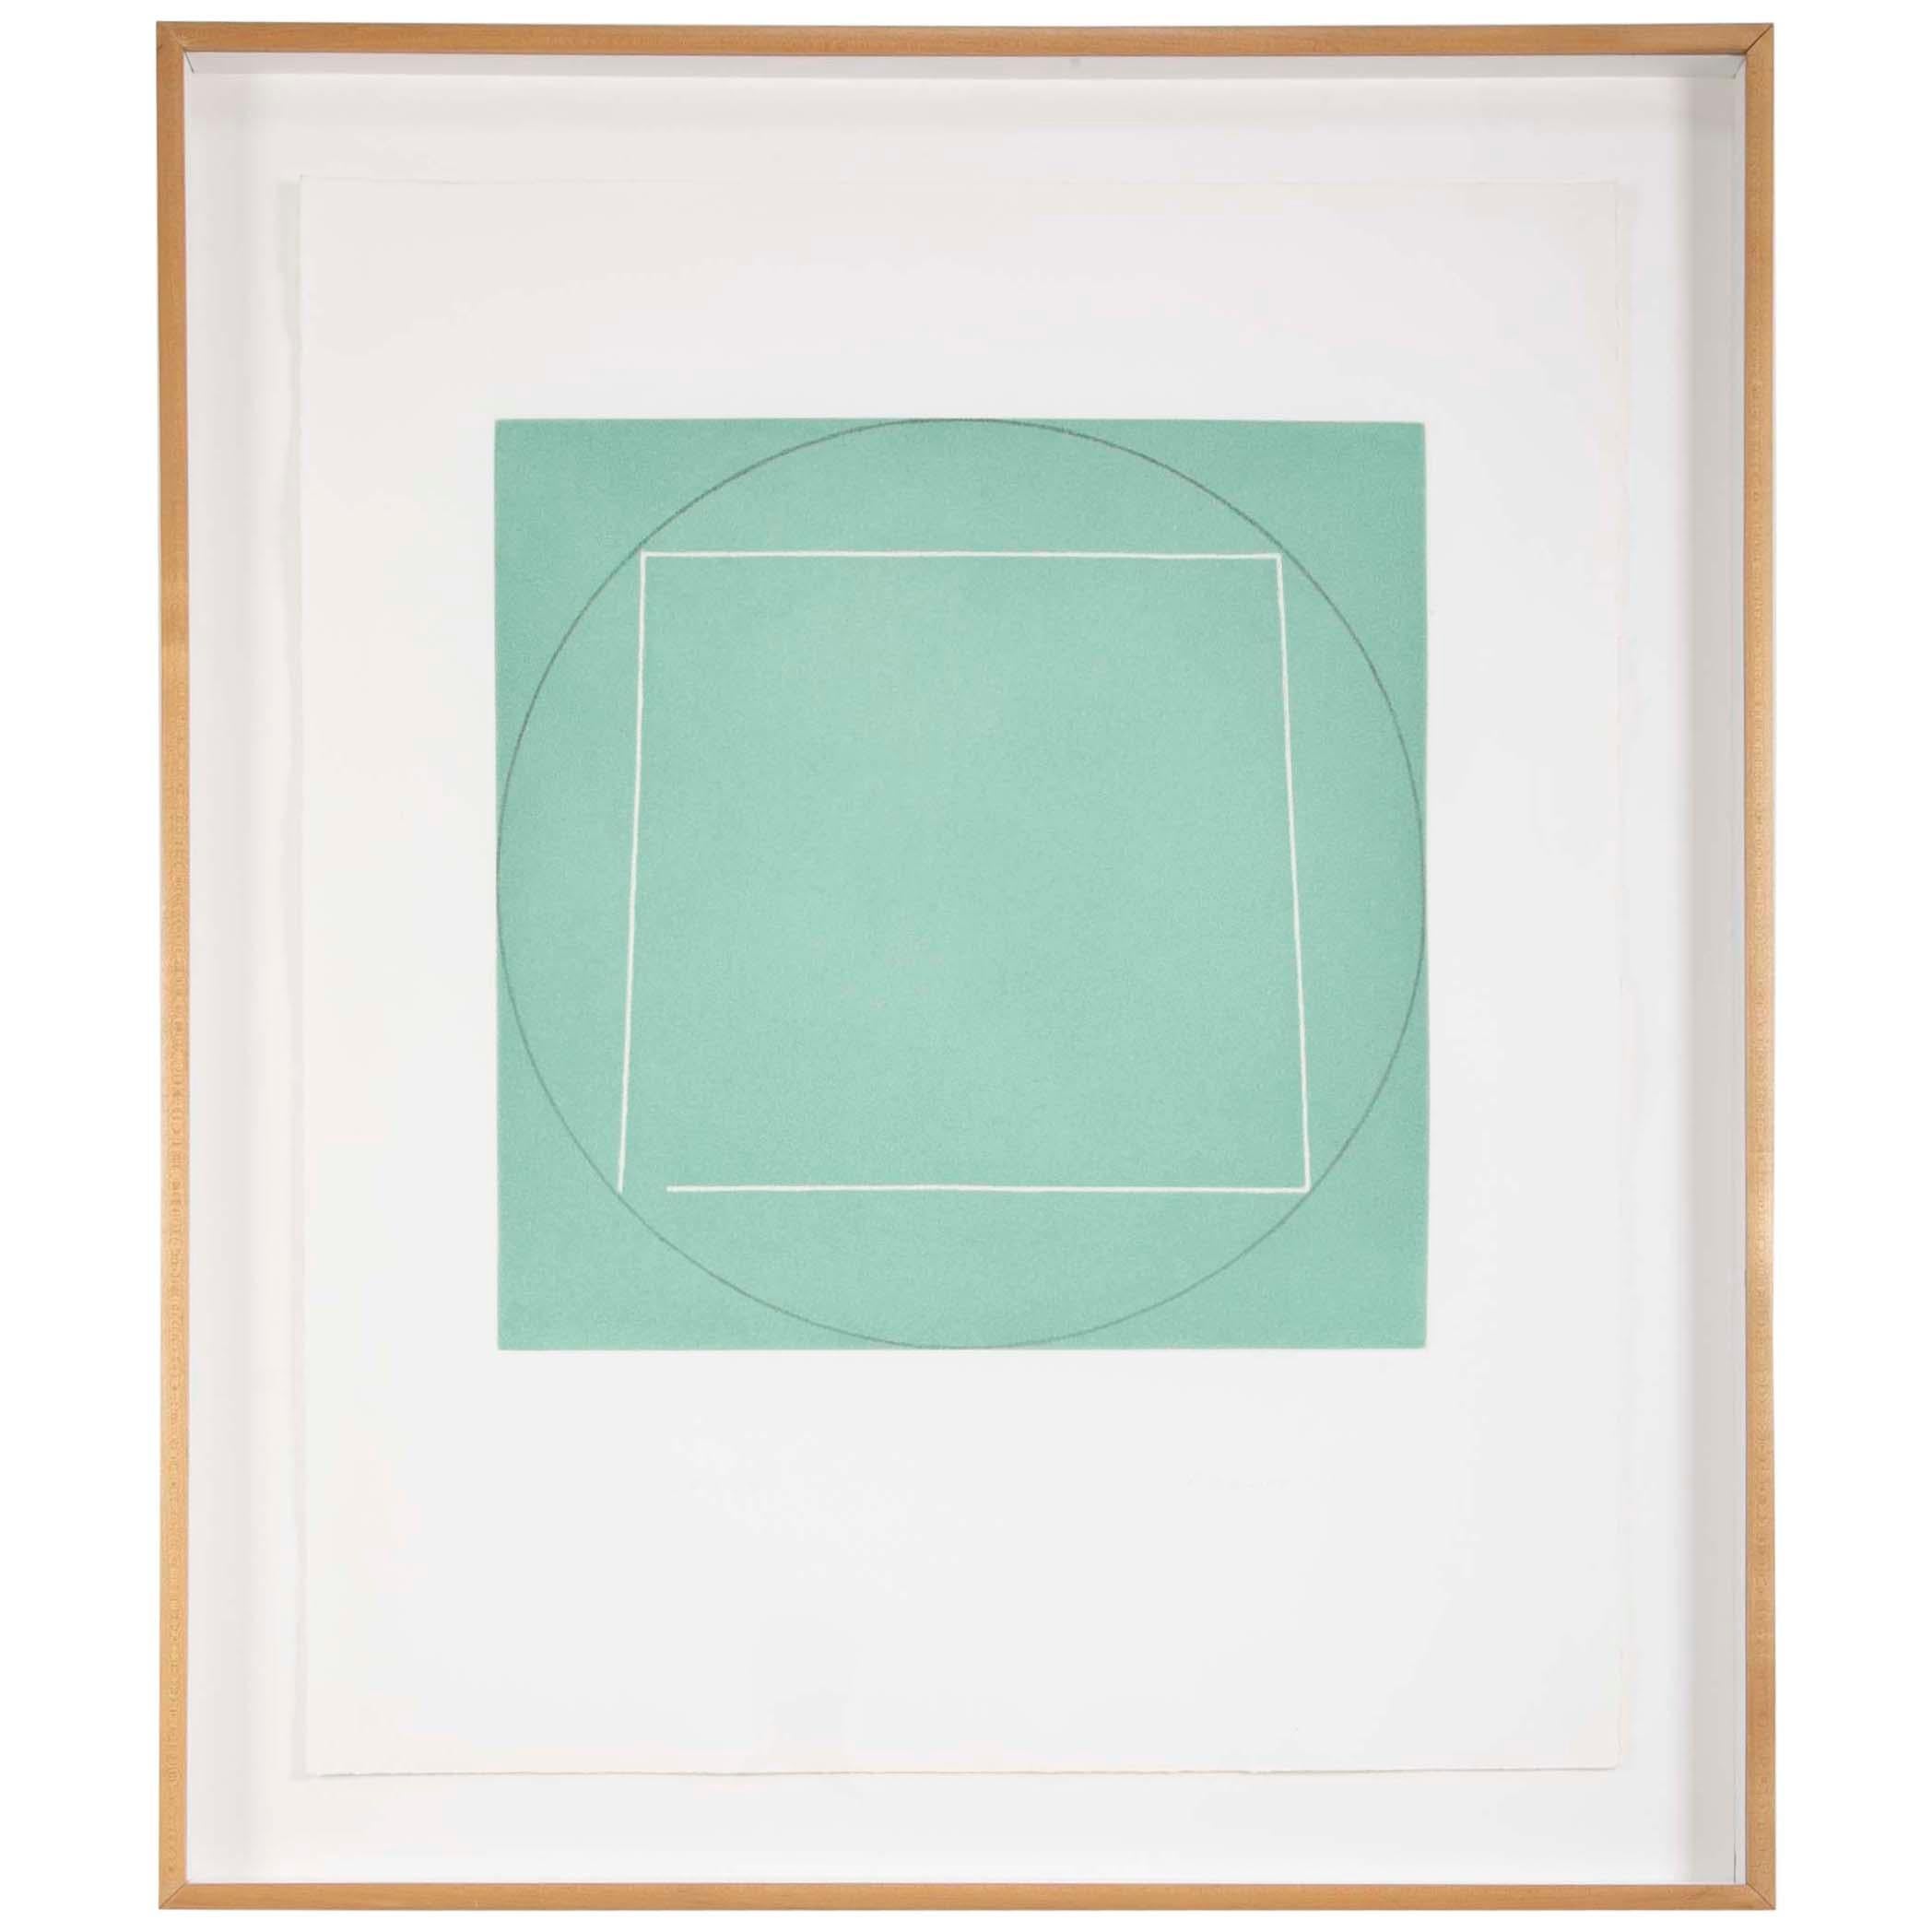 Robert Mangold, Aquatint Etching Titled "Distorted Square Within a Circle" For Sale